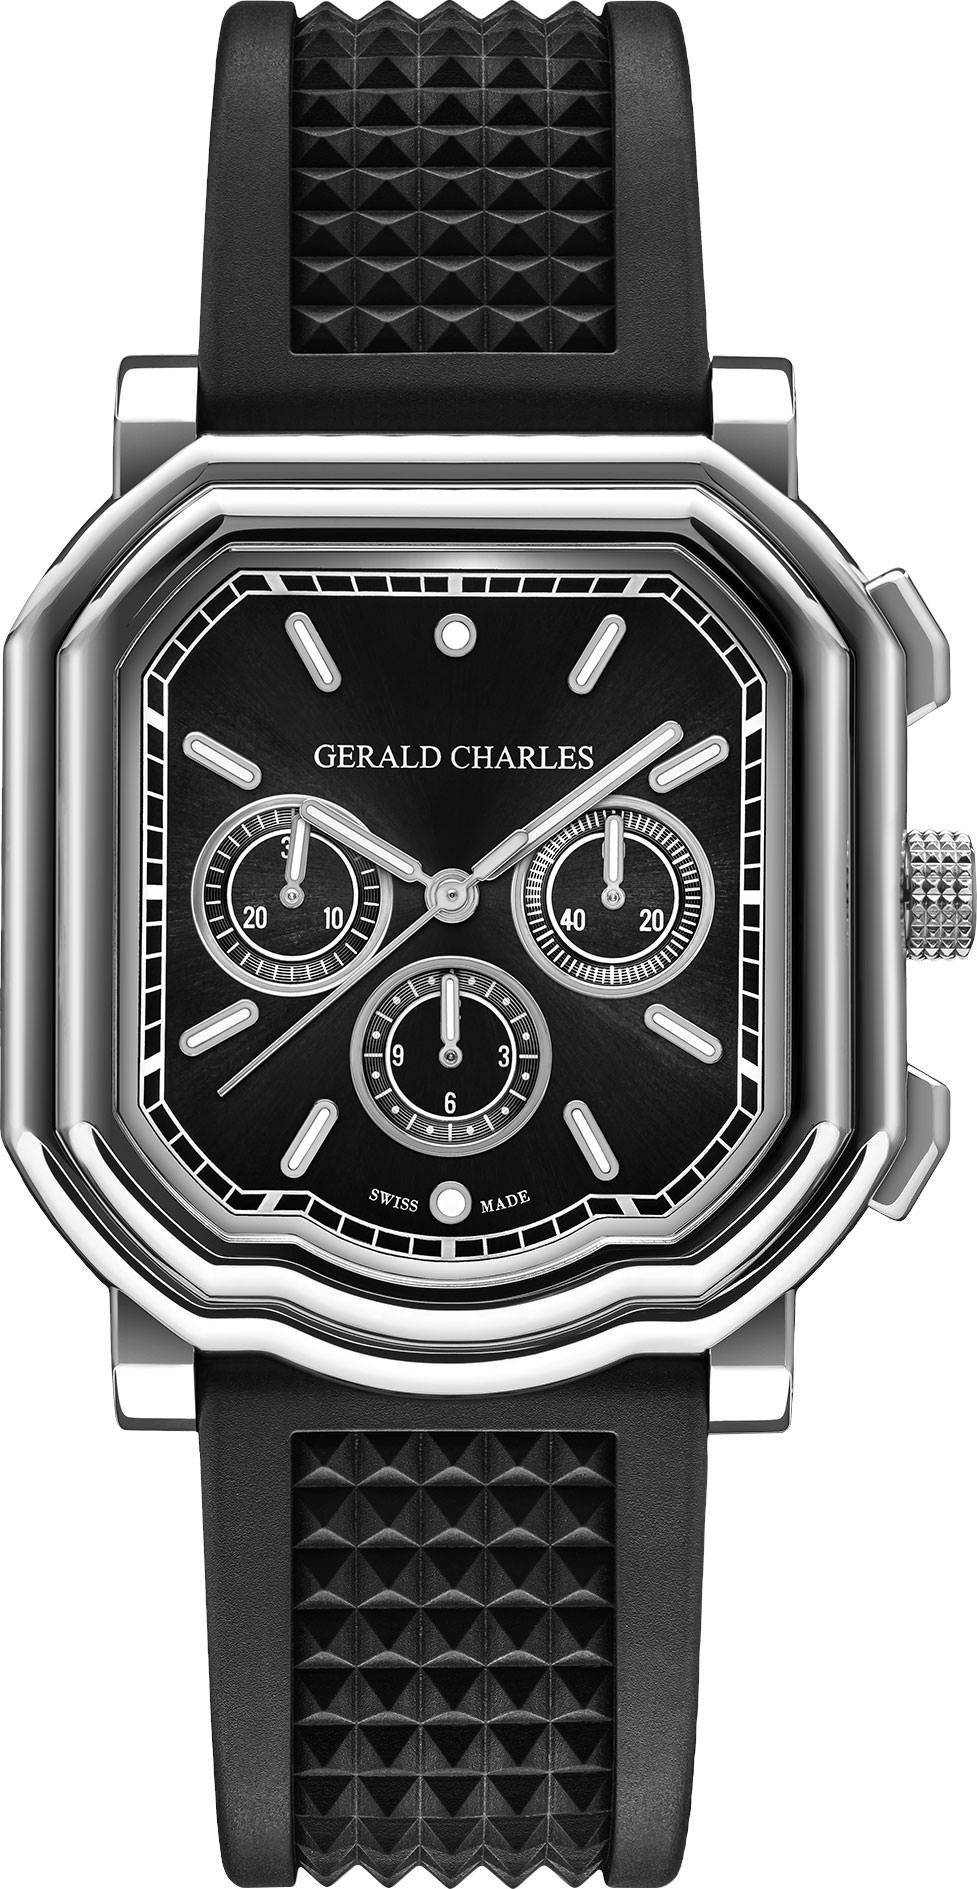 Gerald Charles Maestro Maestro 3.0 Chronograph Black Dial 41.7 mm Automatic Watch For Unisex - 1